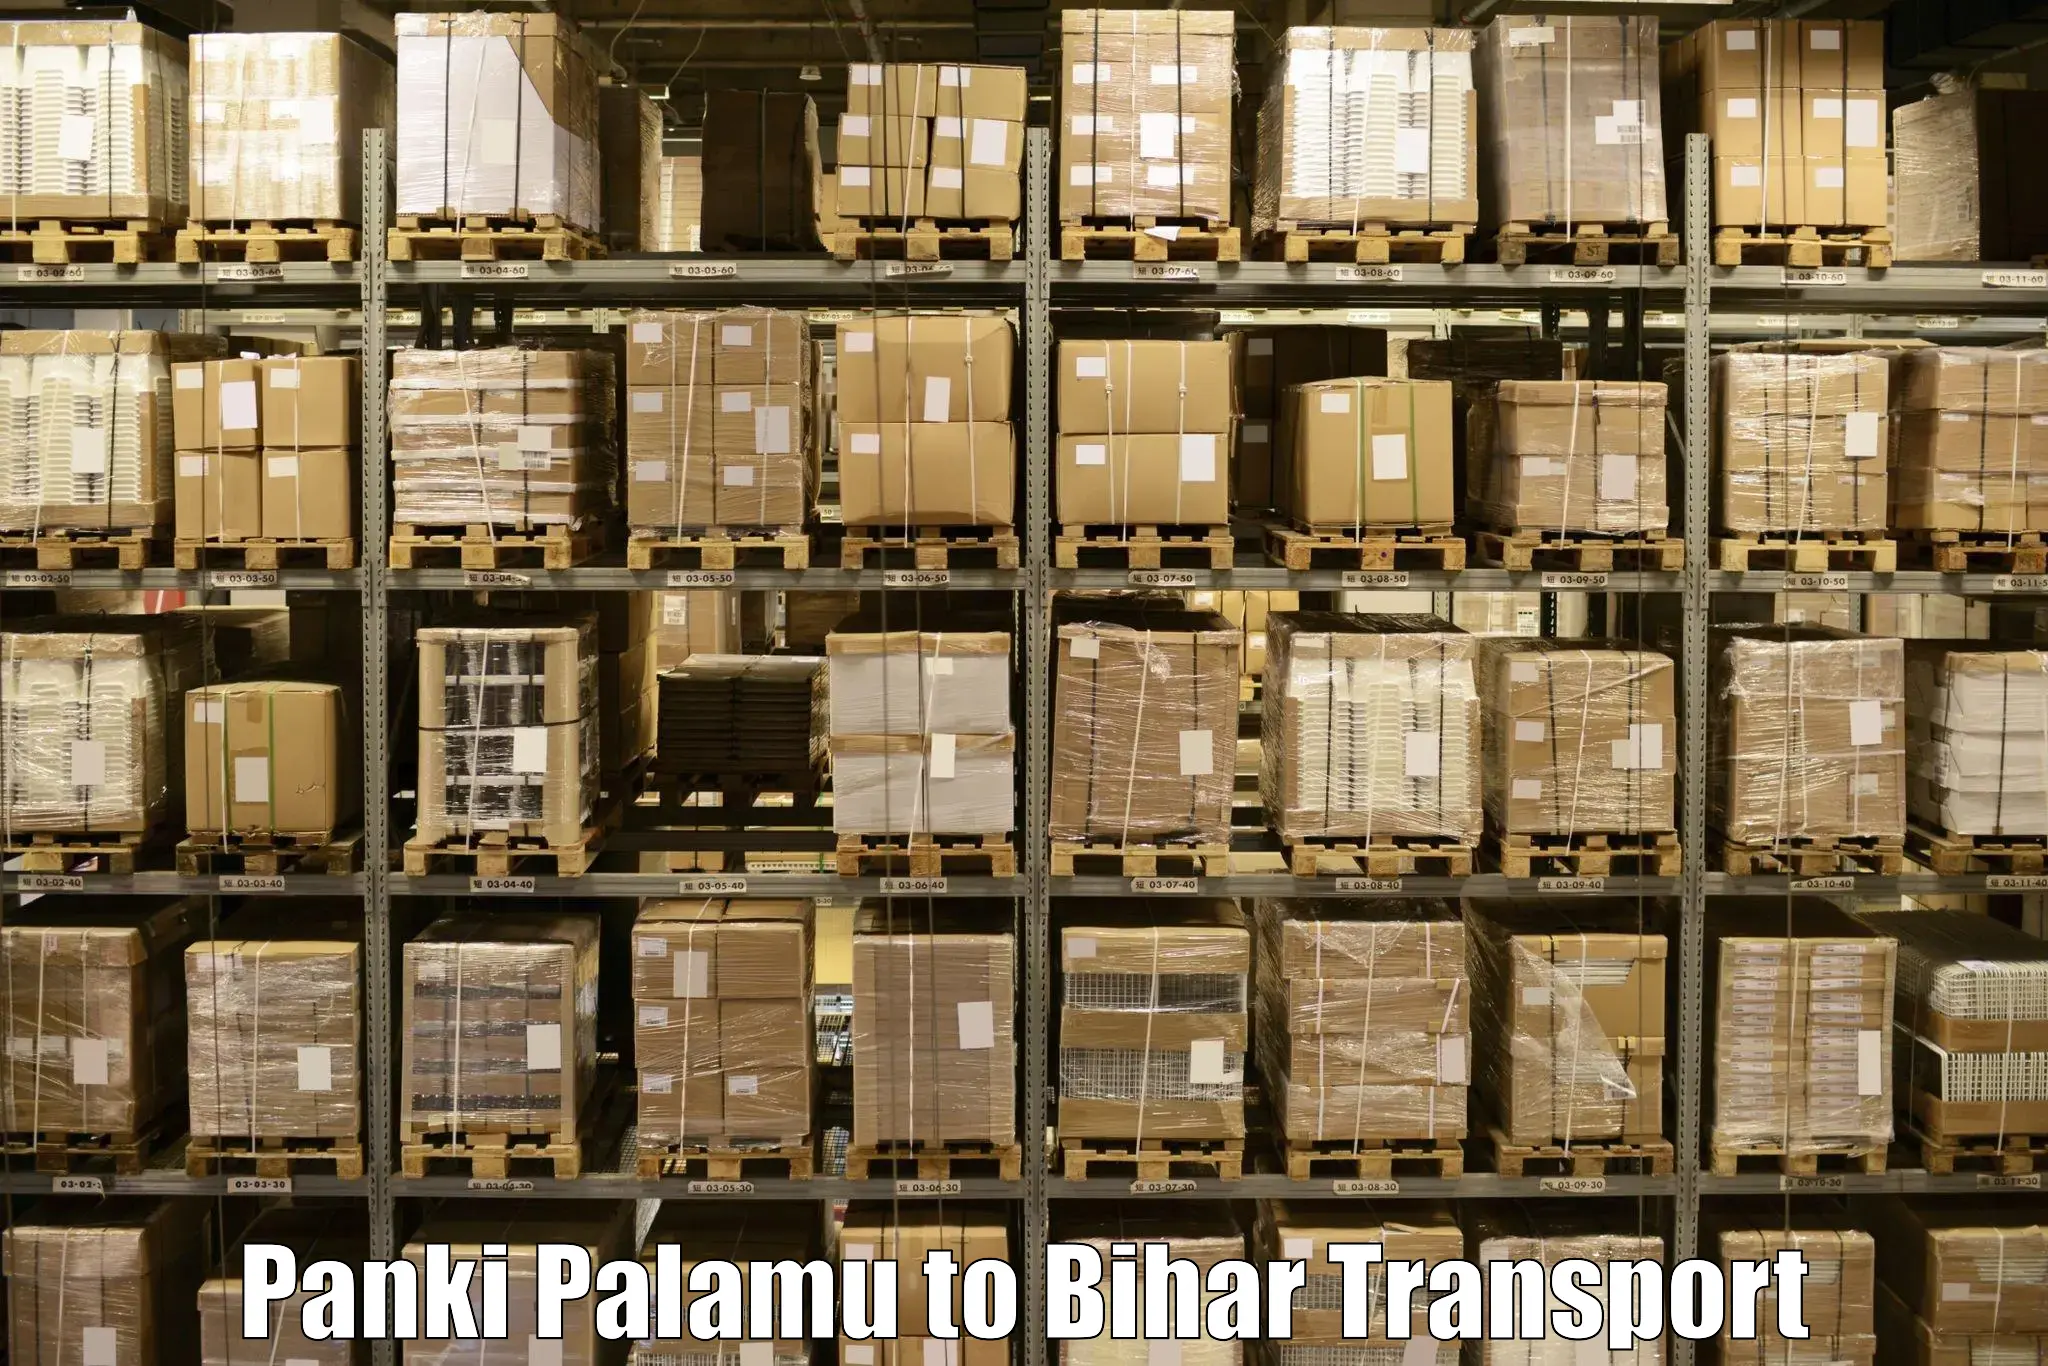 Express transport services in Panki Palamu to Mohania